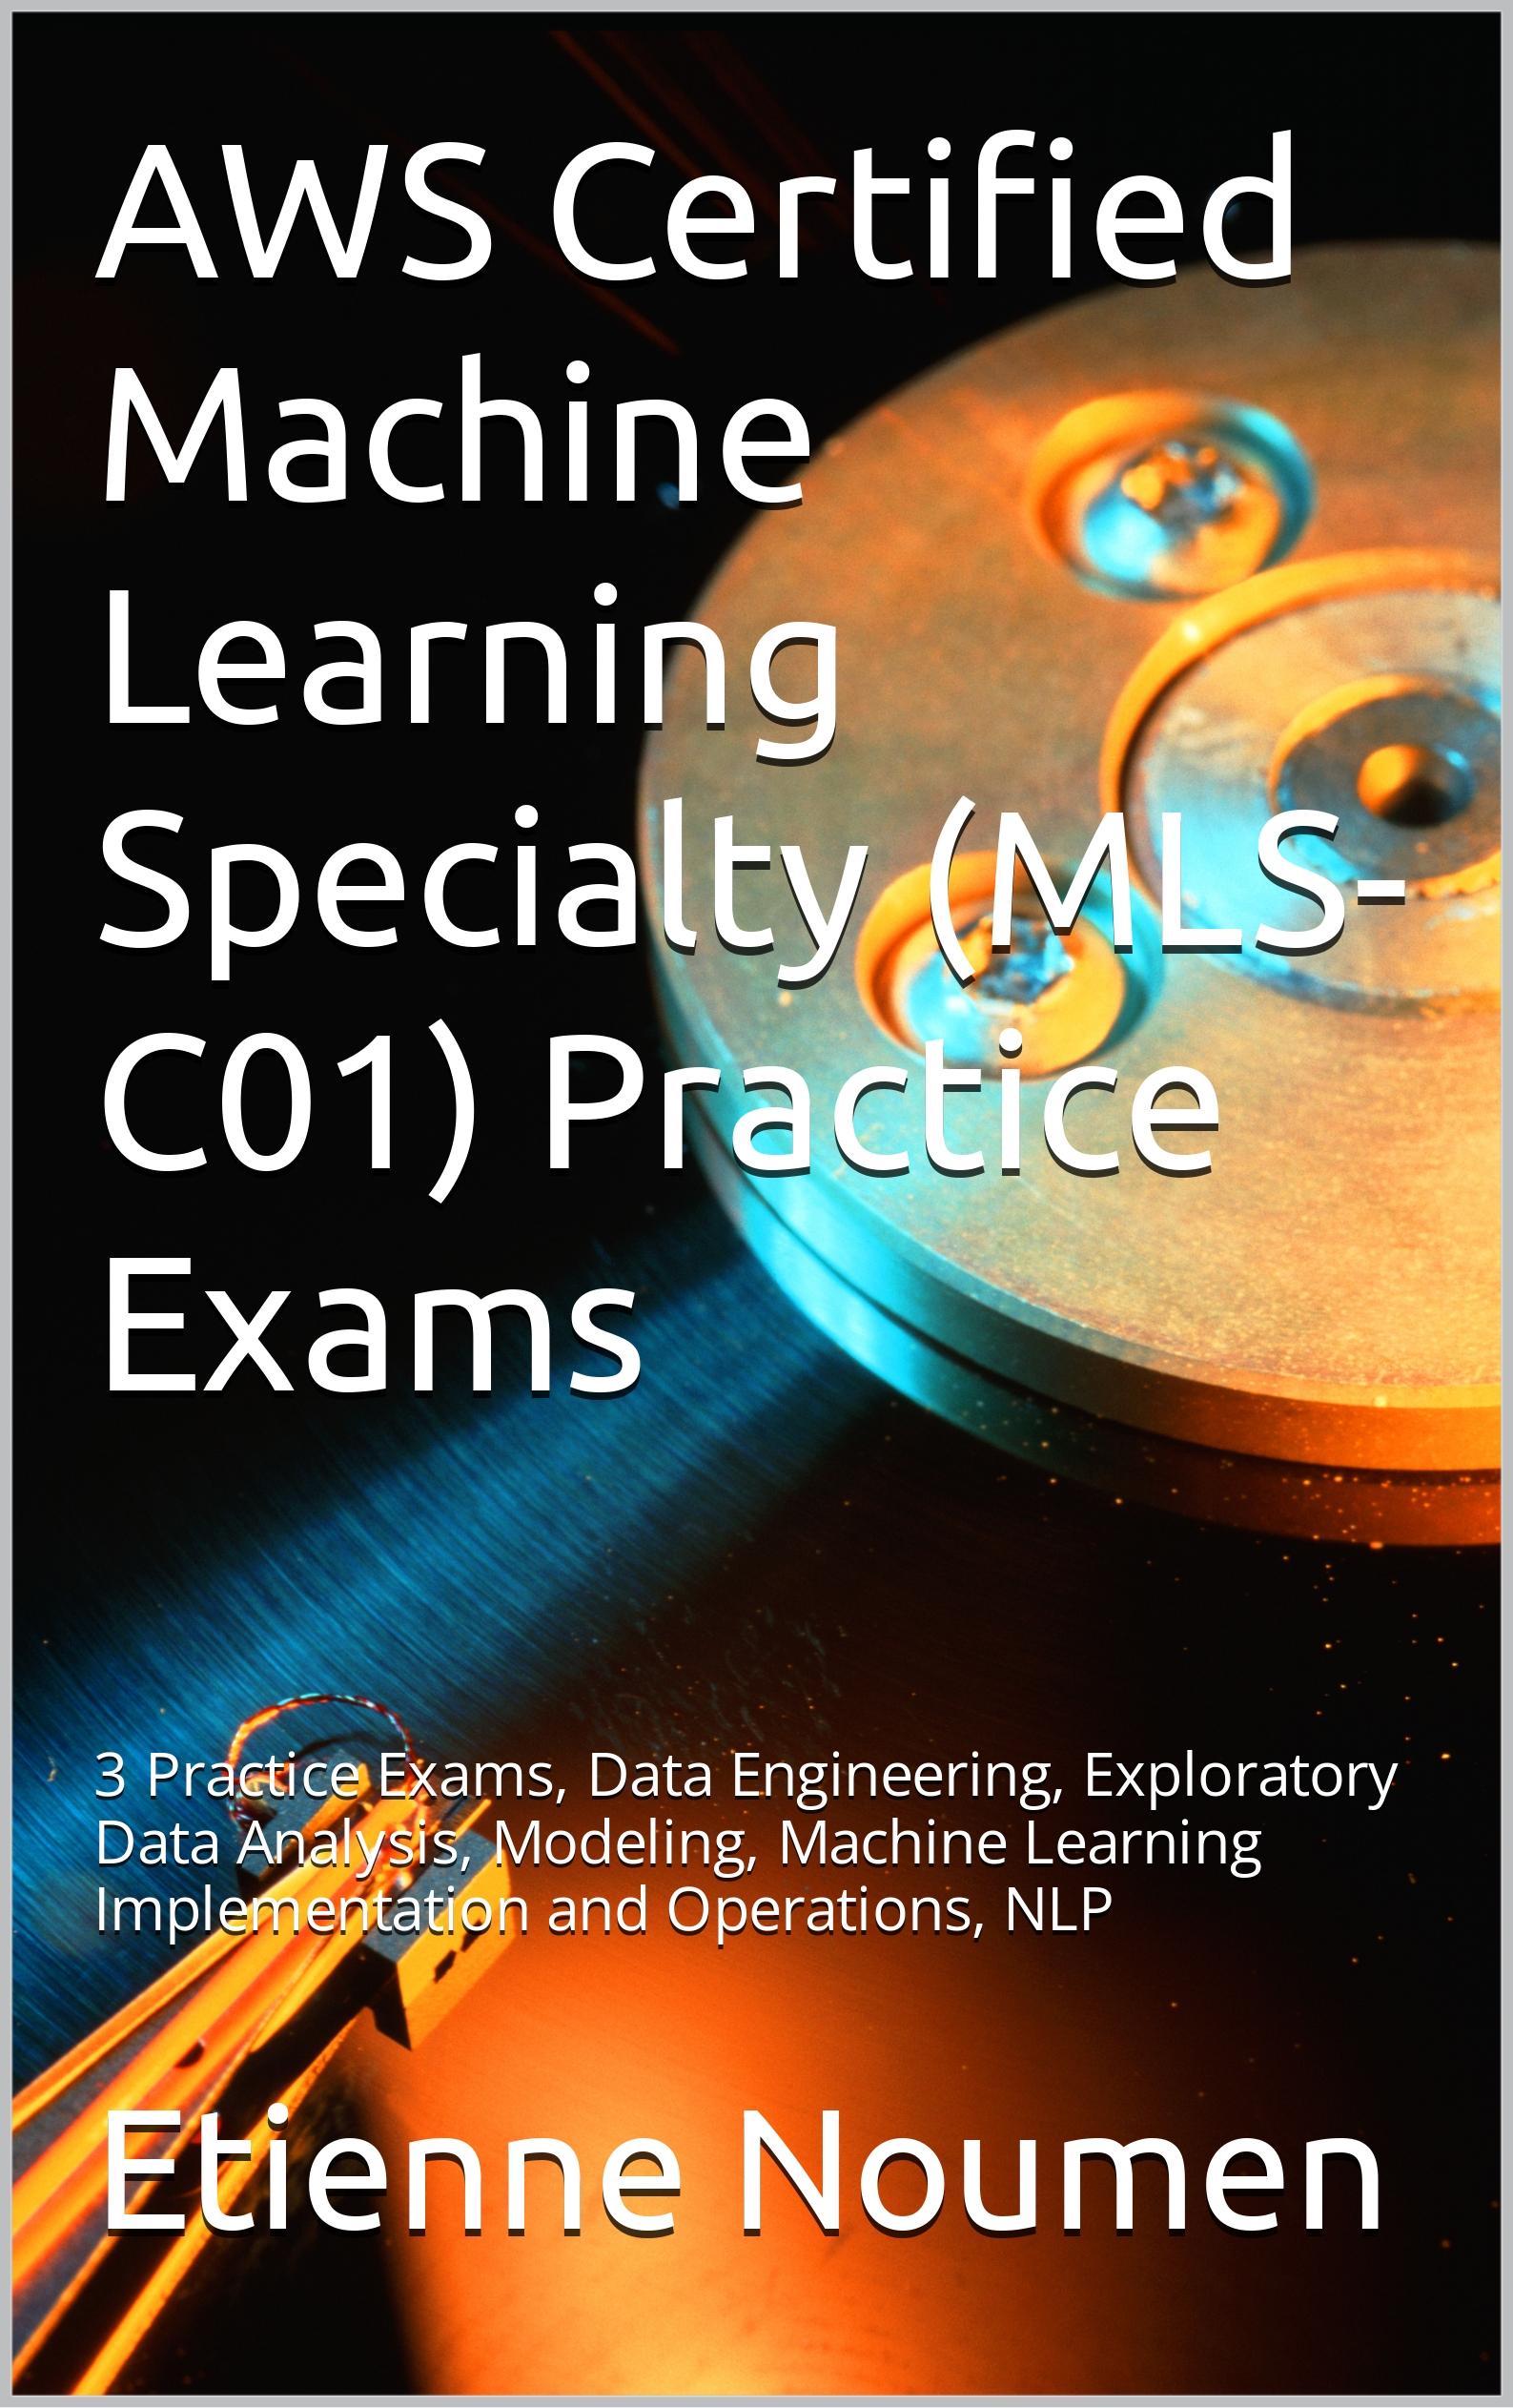 Pass the AWS Certified Machine Learning Specialty Exam with Flying Colors: Master Data Engineering, Exploratory Data Analysis, Modeling, Machine Learning Implementation, Operations, and NLP with 3 Practice Exams. Get the MLS-C01 Practice Exam book Now!